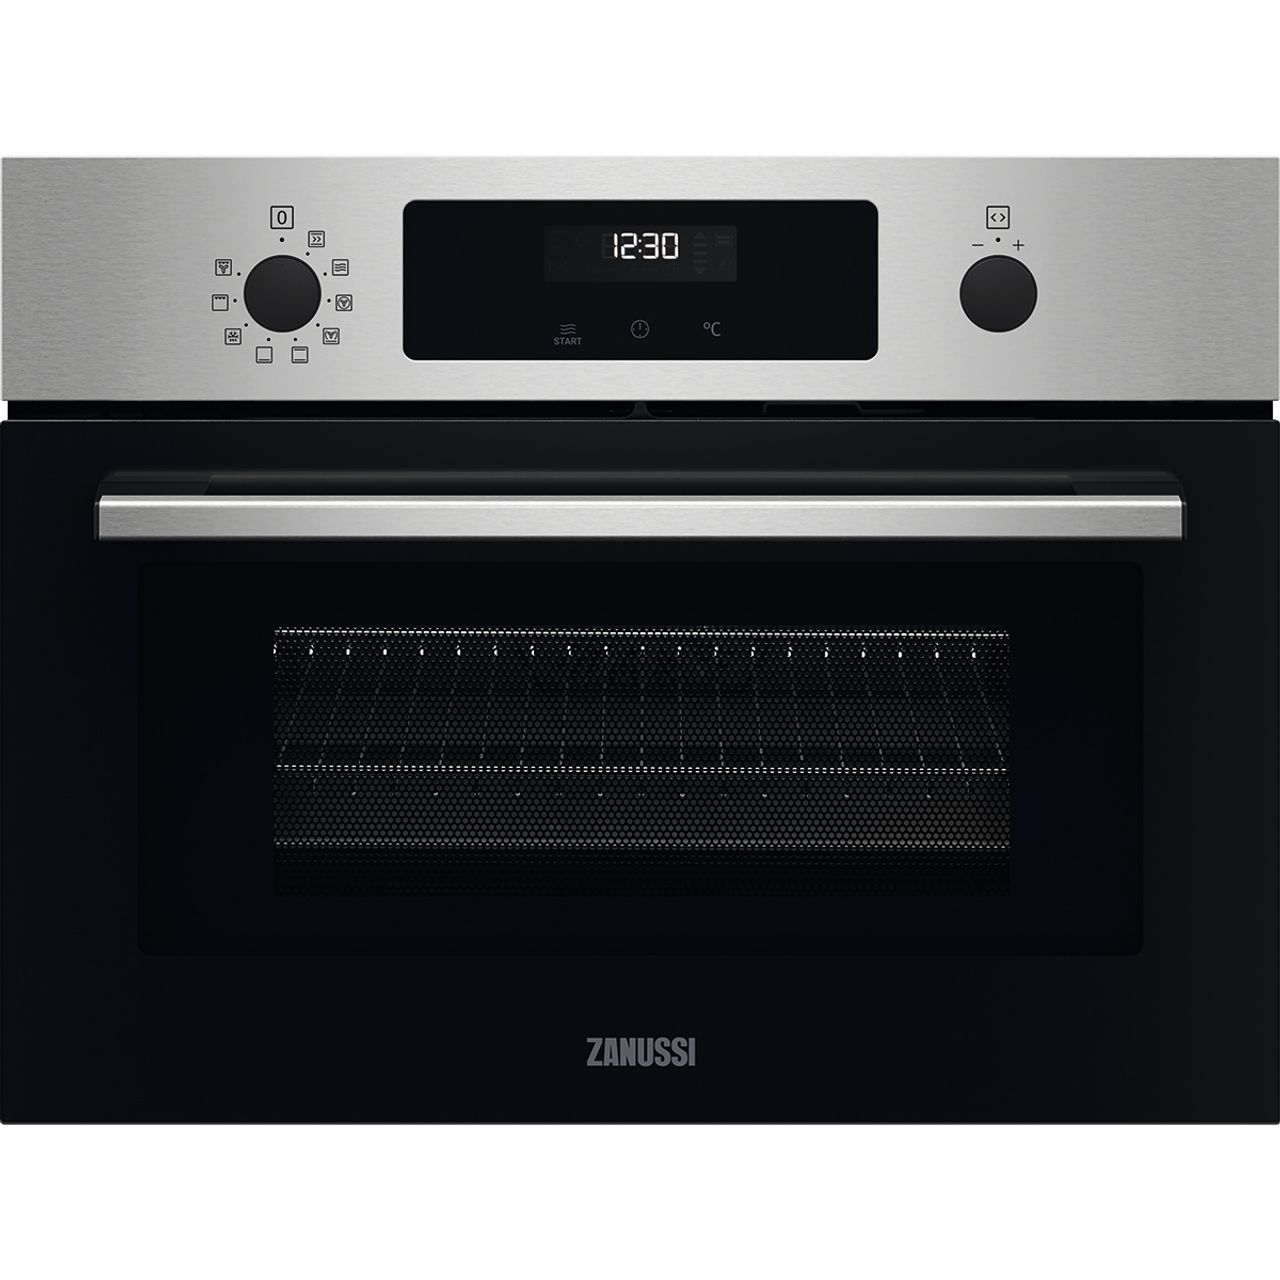 Zanussi ZVENM6X2 Built In Compact Electric Single Oven with Microwave Function Review